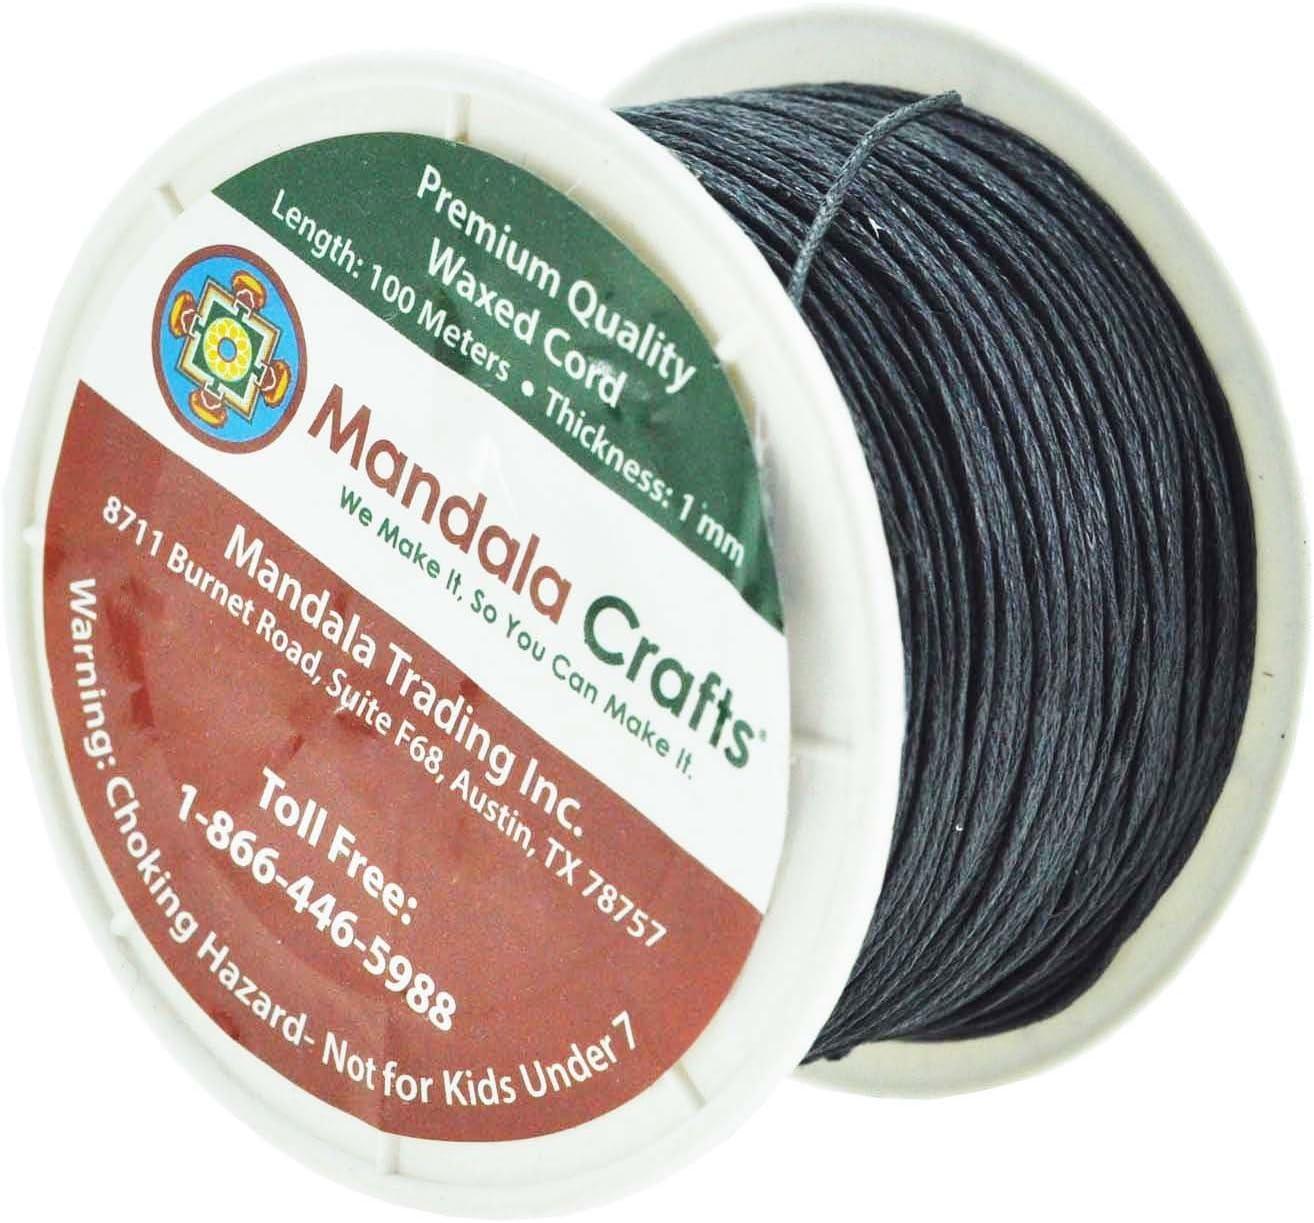 Mandala Crafts Size 2mm Black Waxed Cord for Jewelry Making - 109 Yds Black  Waxed Cotton Cord for Jewelry String Bracelet Cord Wax Cord Necklace String  Black 2mm 109 Yards